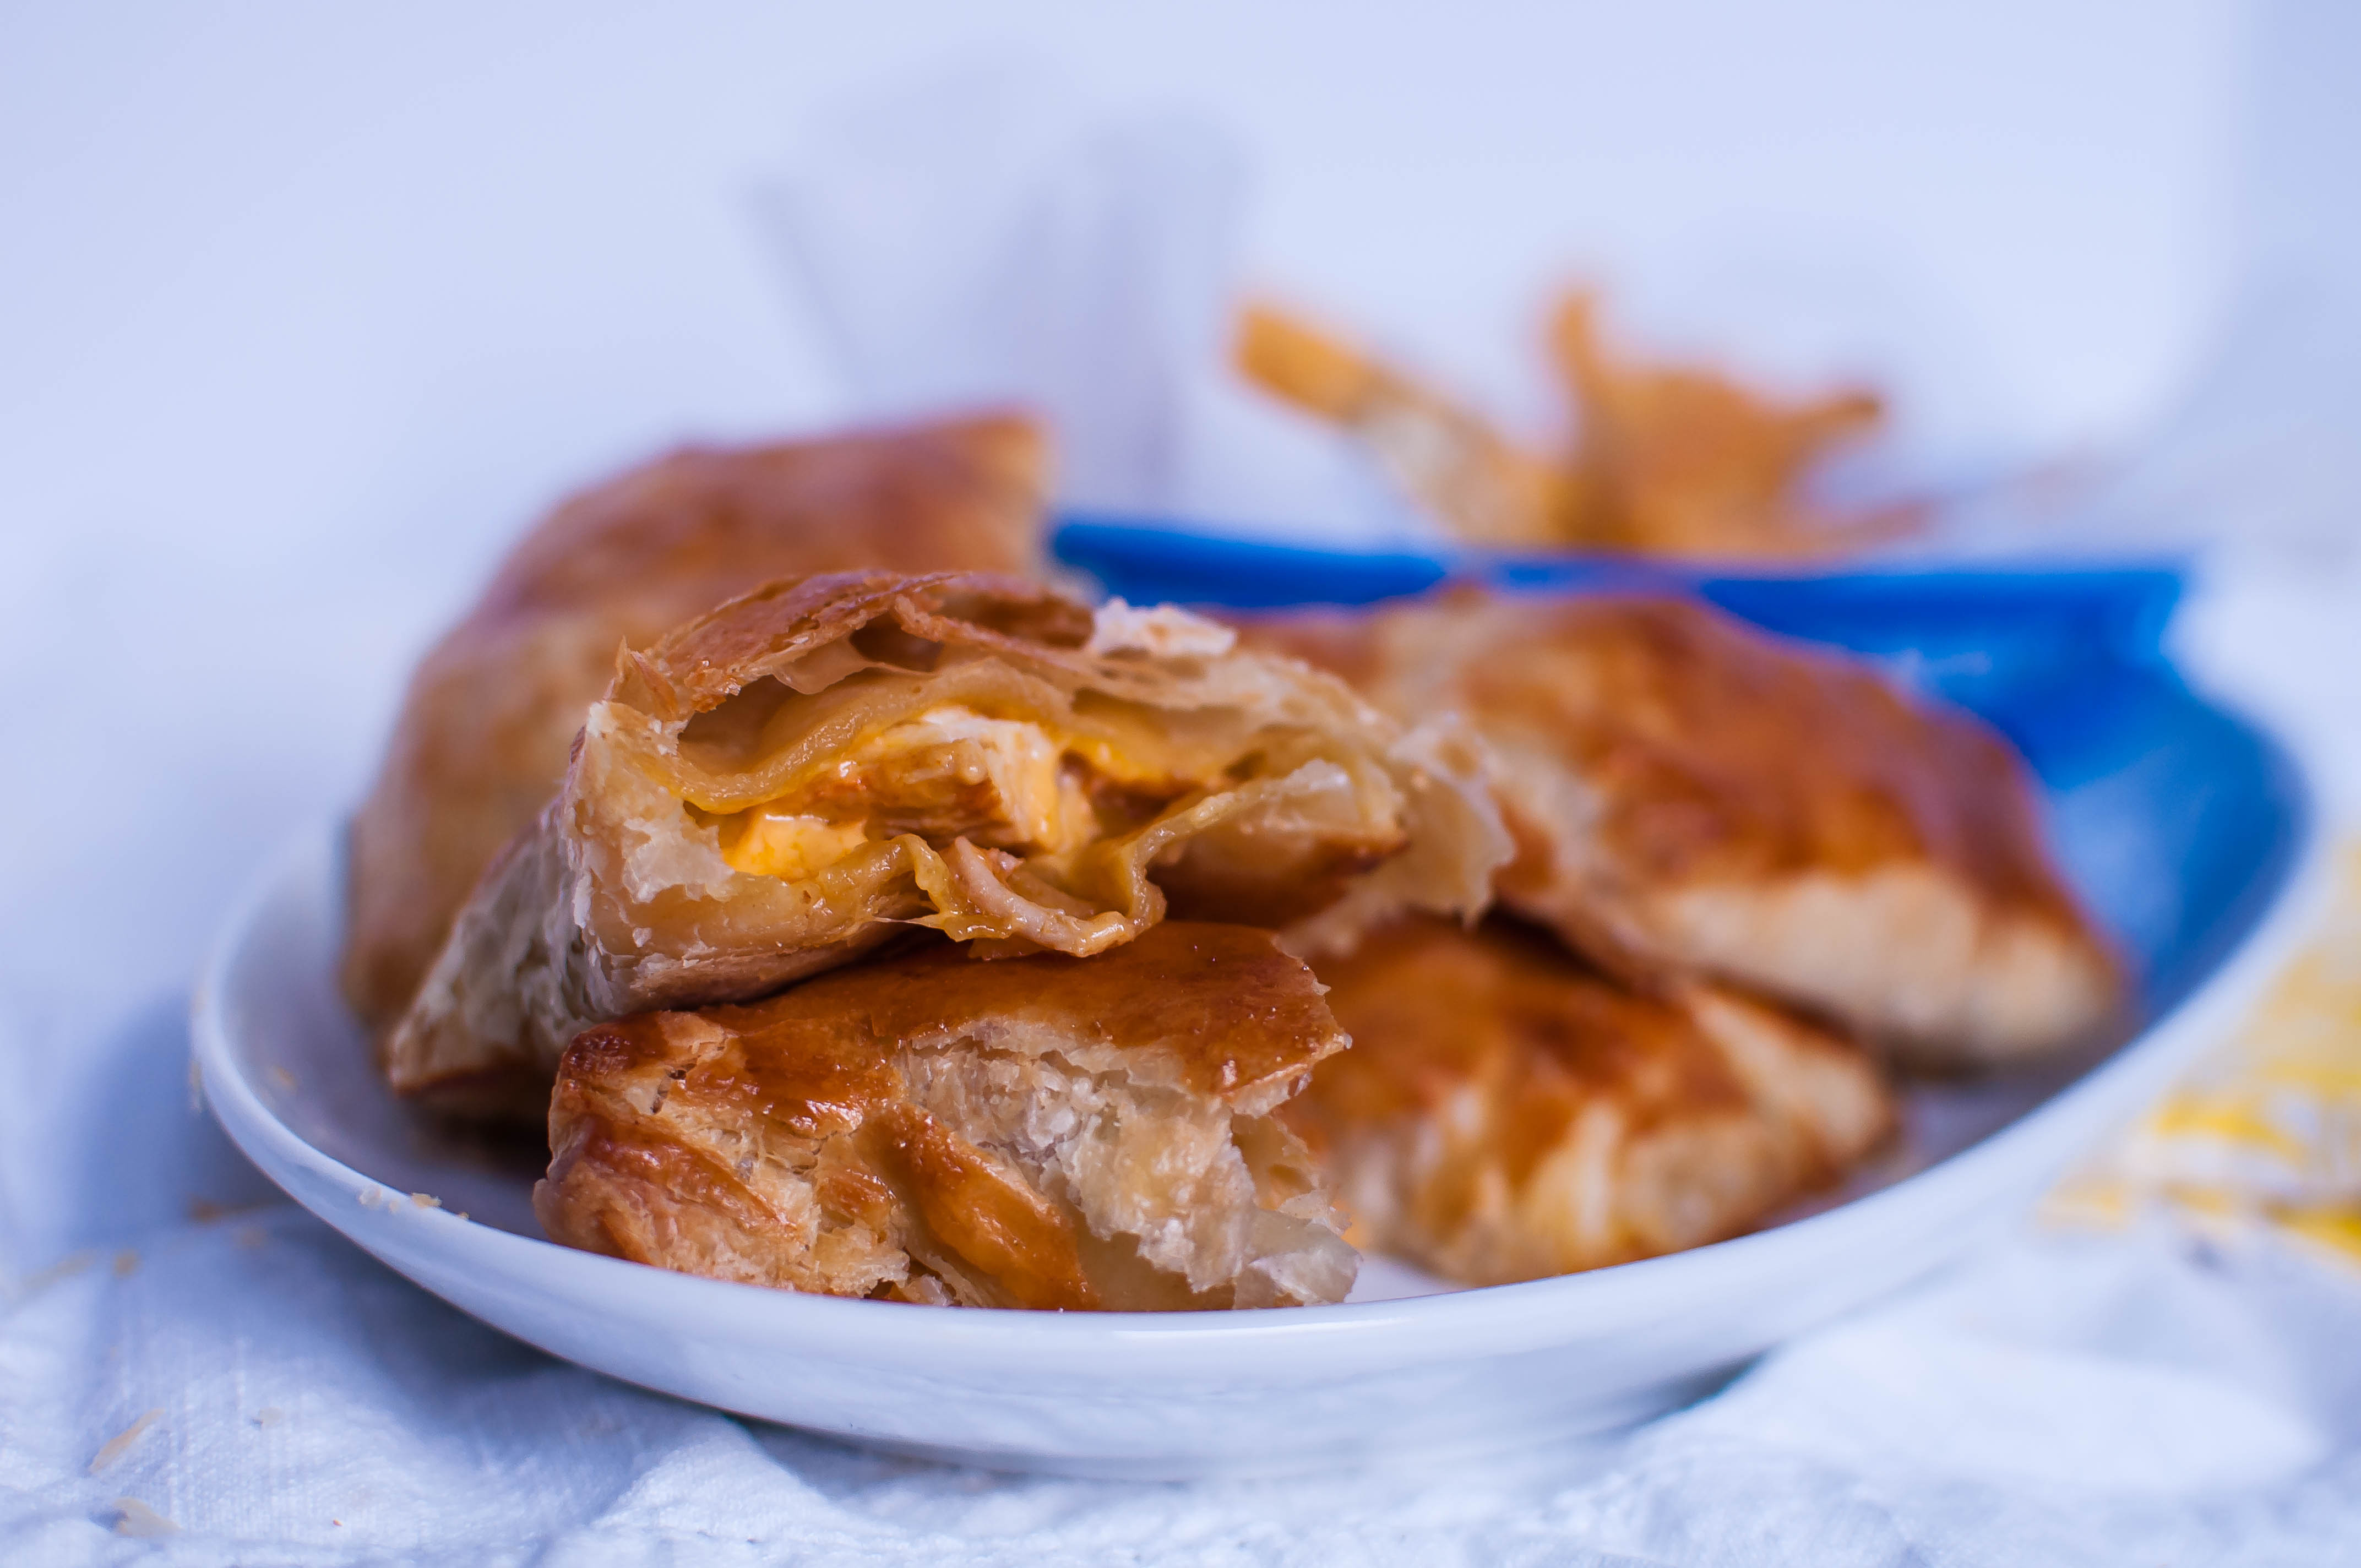 Looking for the perfect appetizer or main dish for the next big game? Look no further than these Buffalo Chicken Pockets. Only 5 ingredients and 30 minutes.